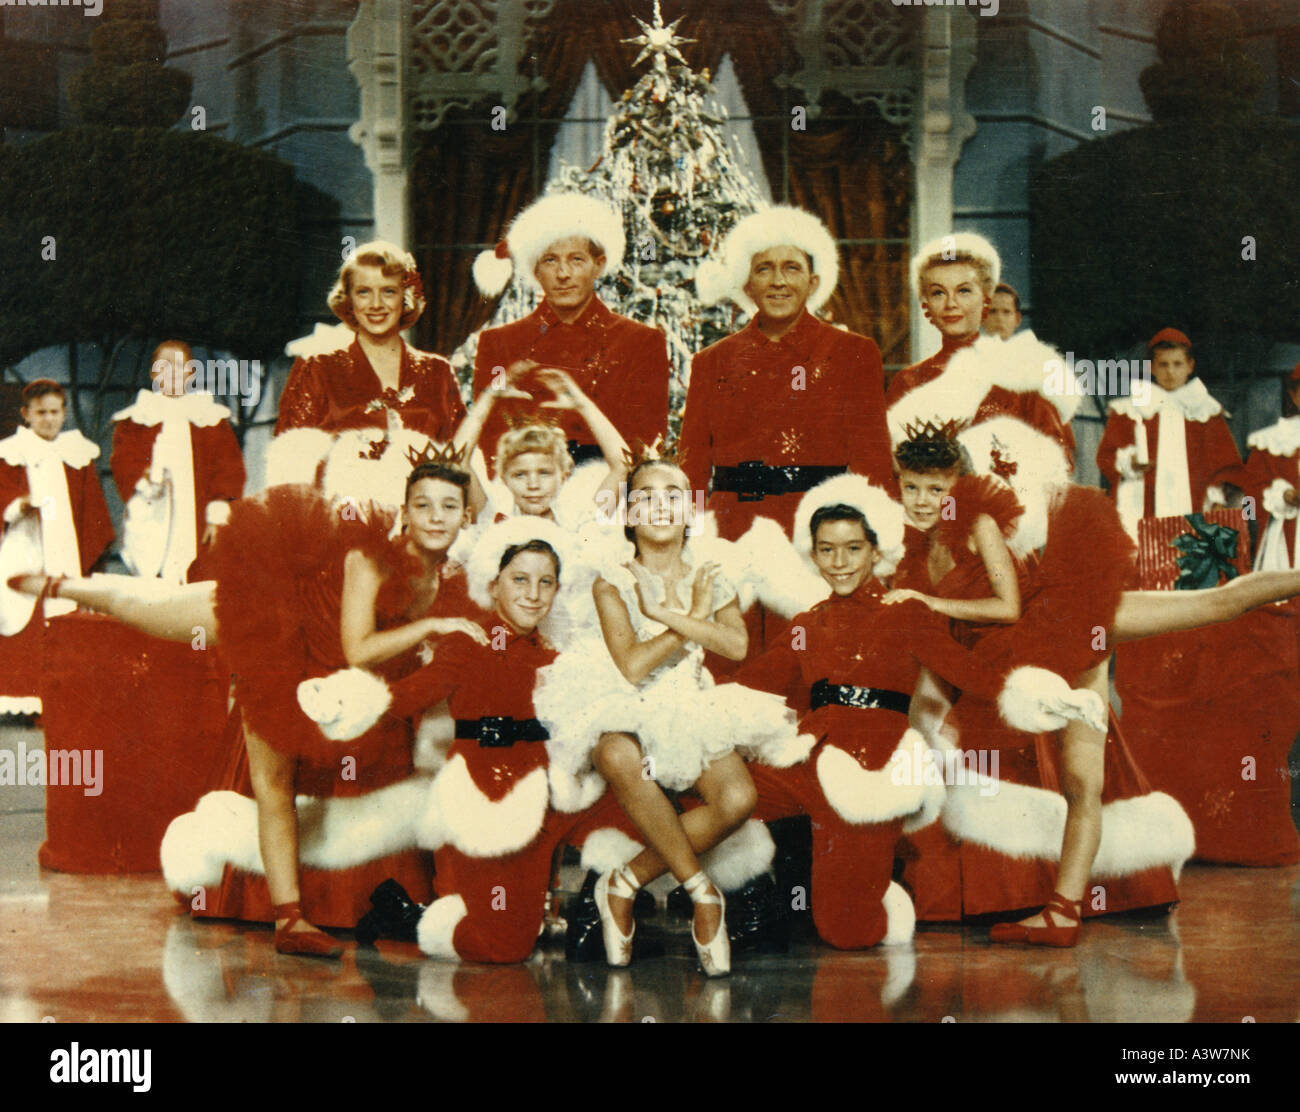 WHITE CHRISTMAS 1954 Paramount film with from left at back Rosemary Clooney, Danny Kaye, Bing Crosby  and Vera-Ellen Stock Photo